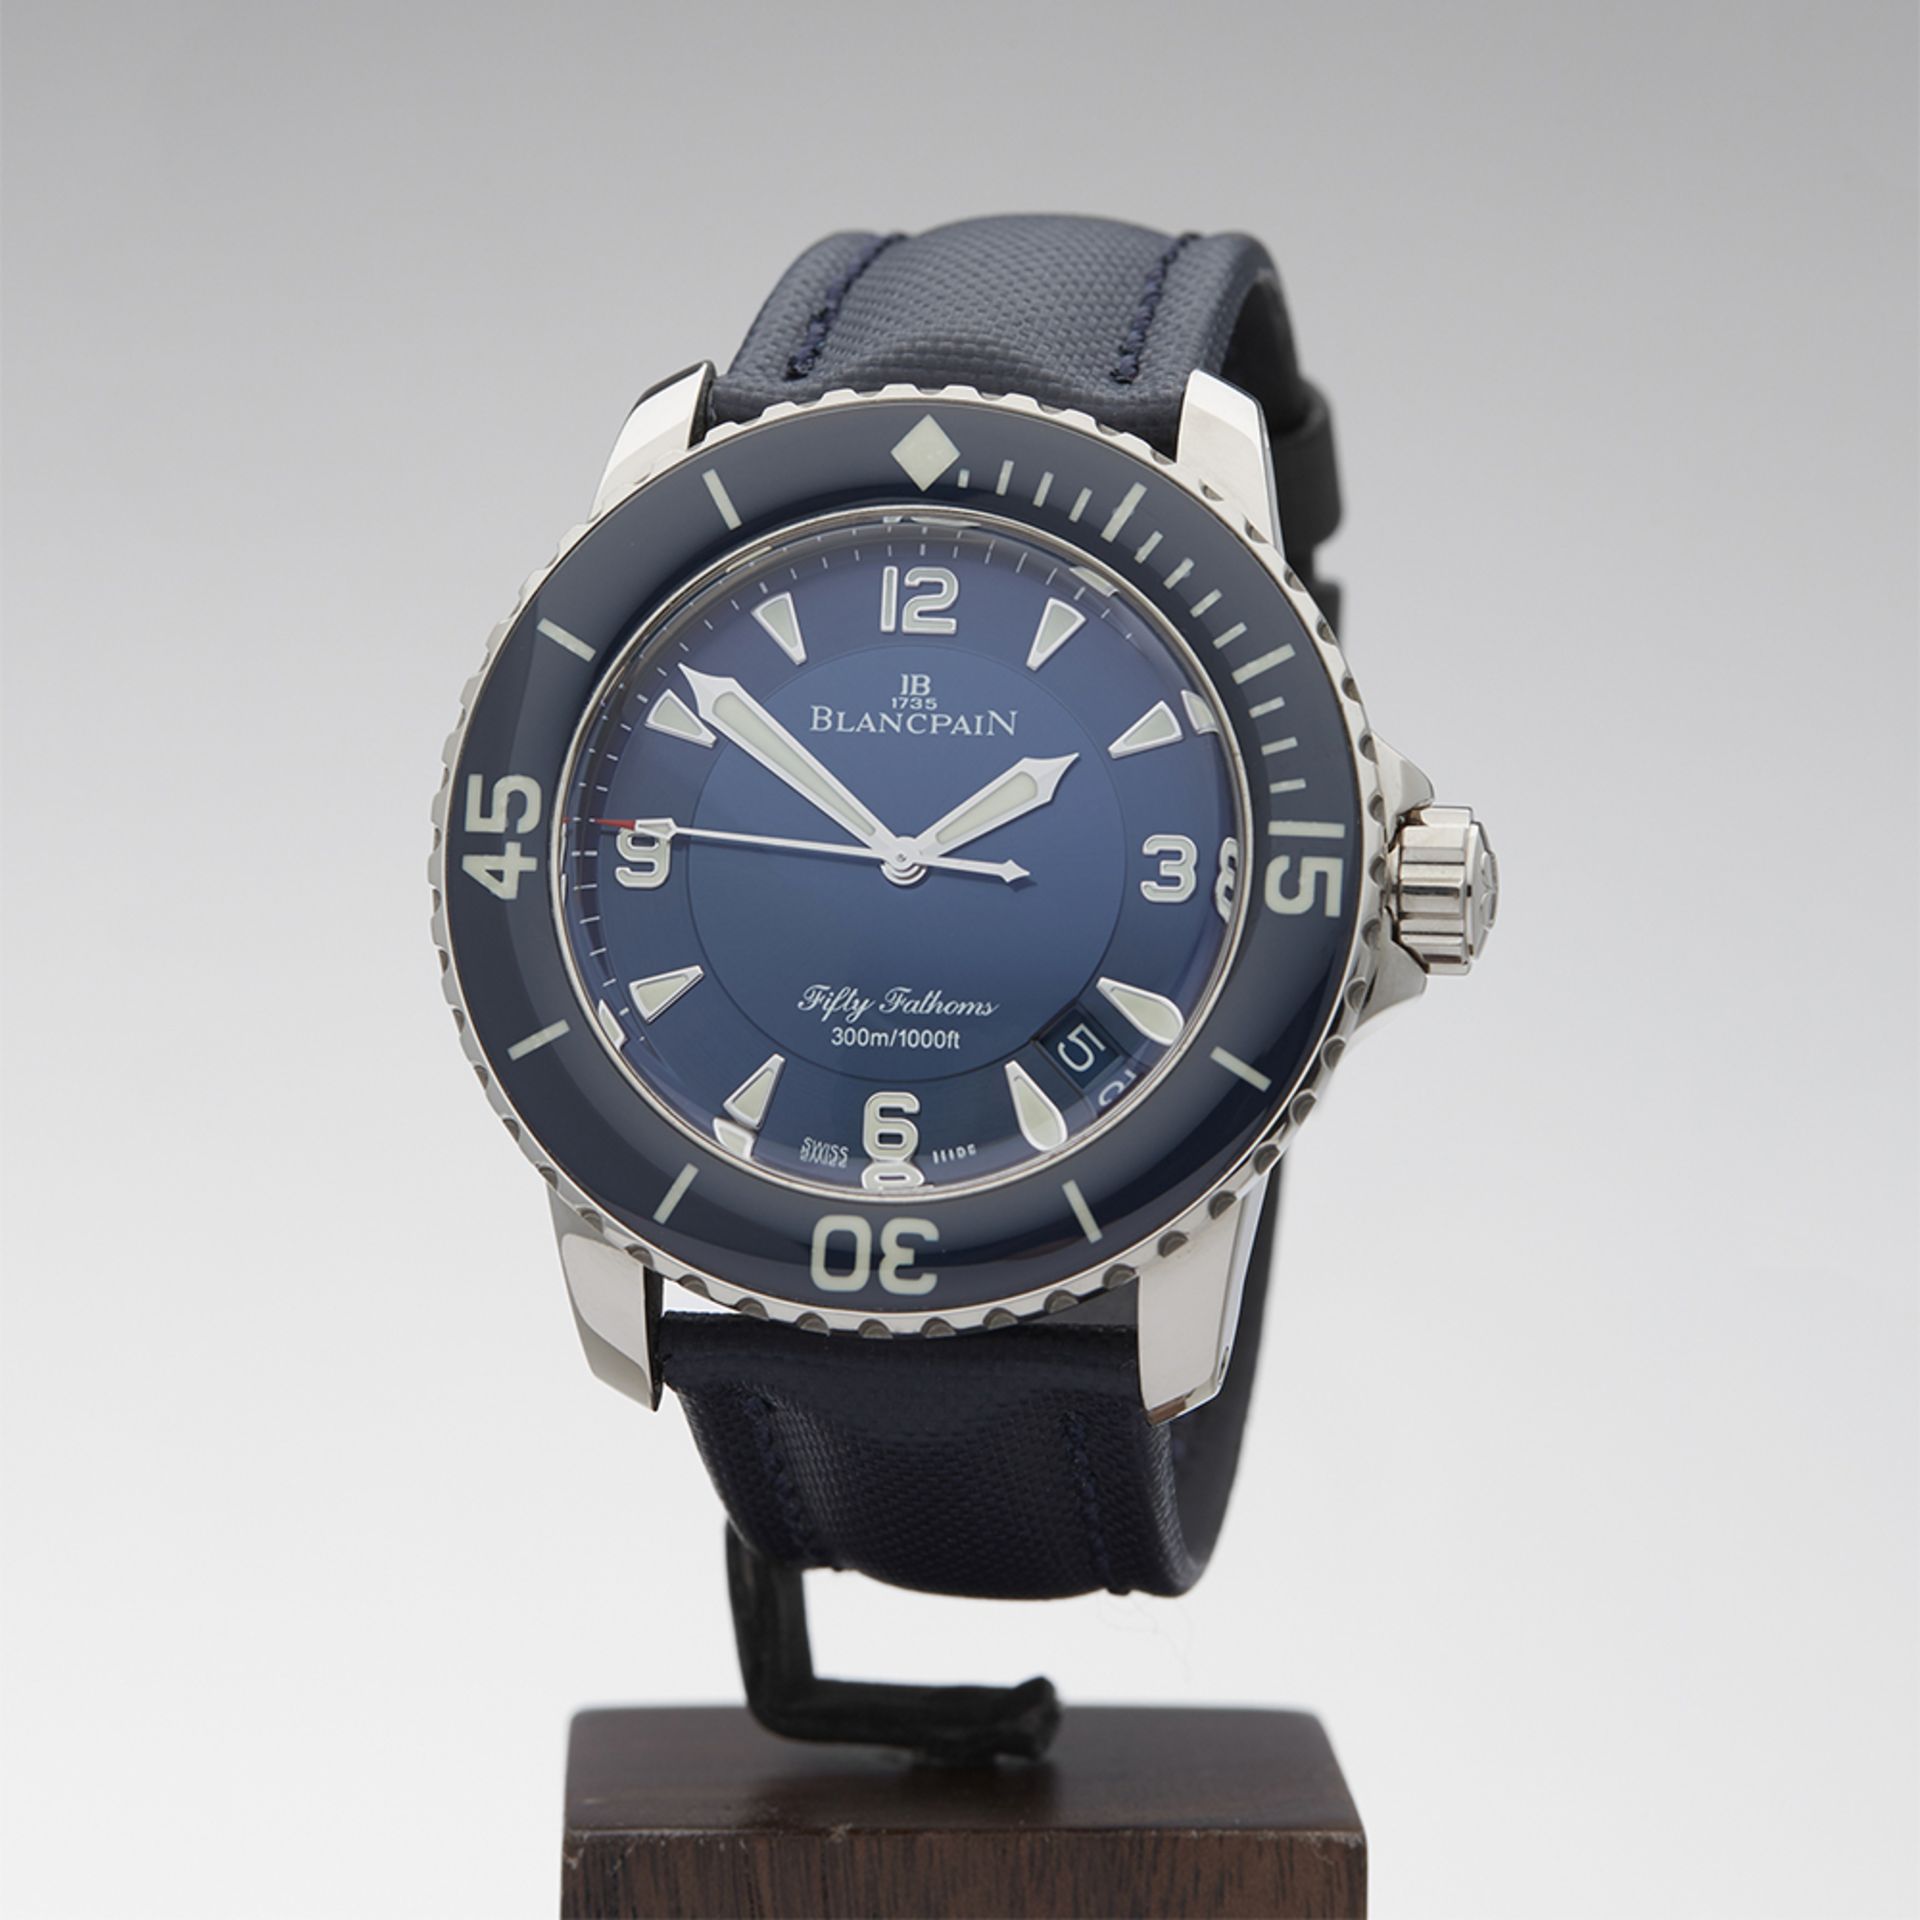 Blancpain Fifty Fathoms 45mm 18k White Gold - 5015-1540 52 - Image 3 of 9